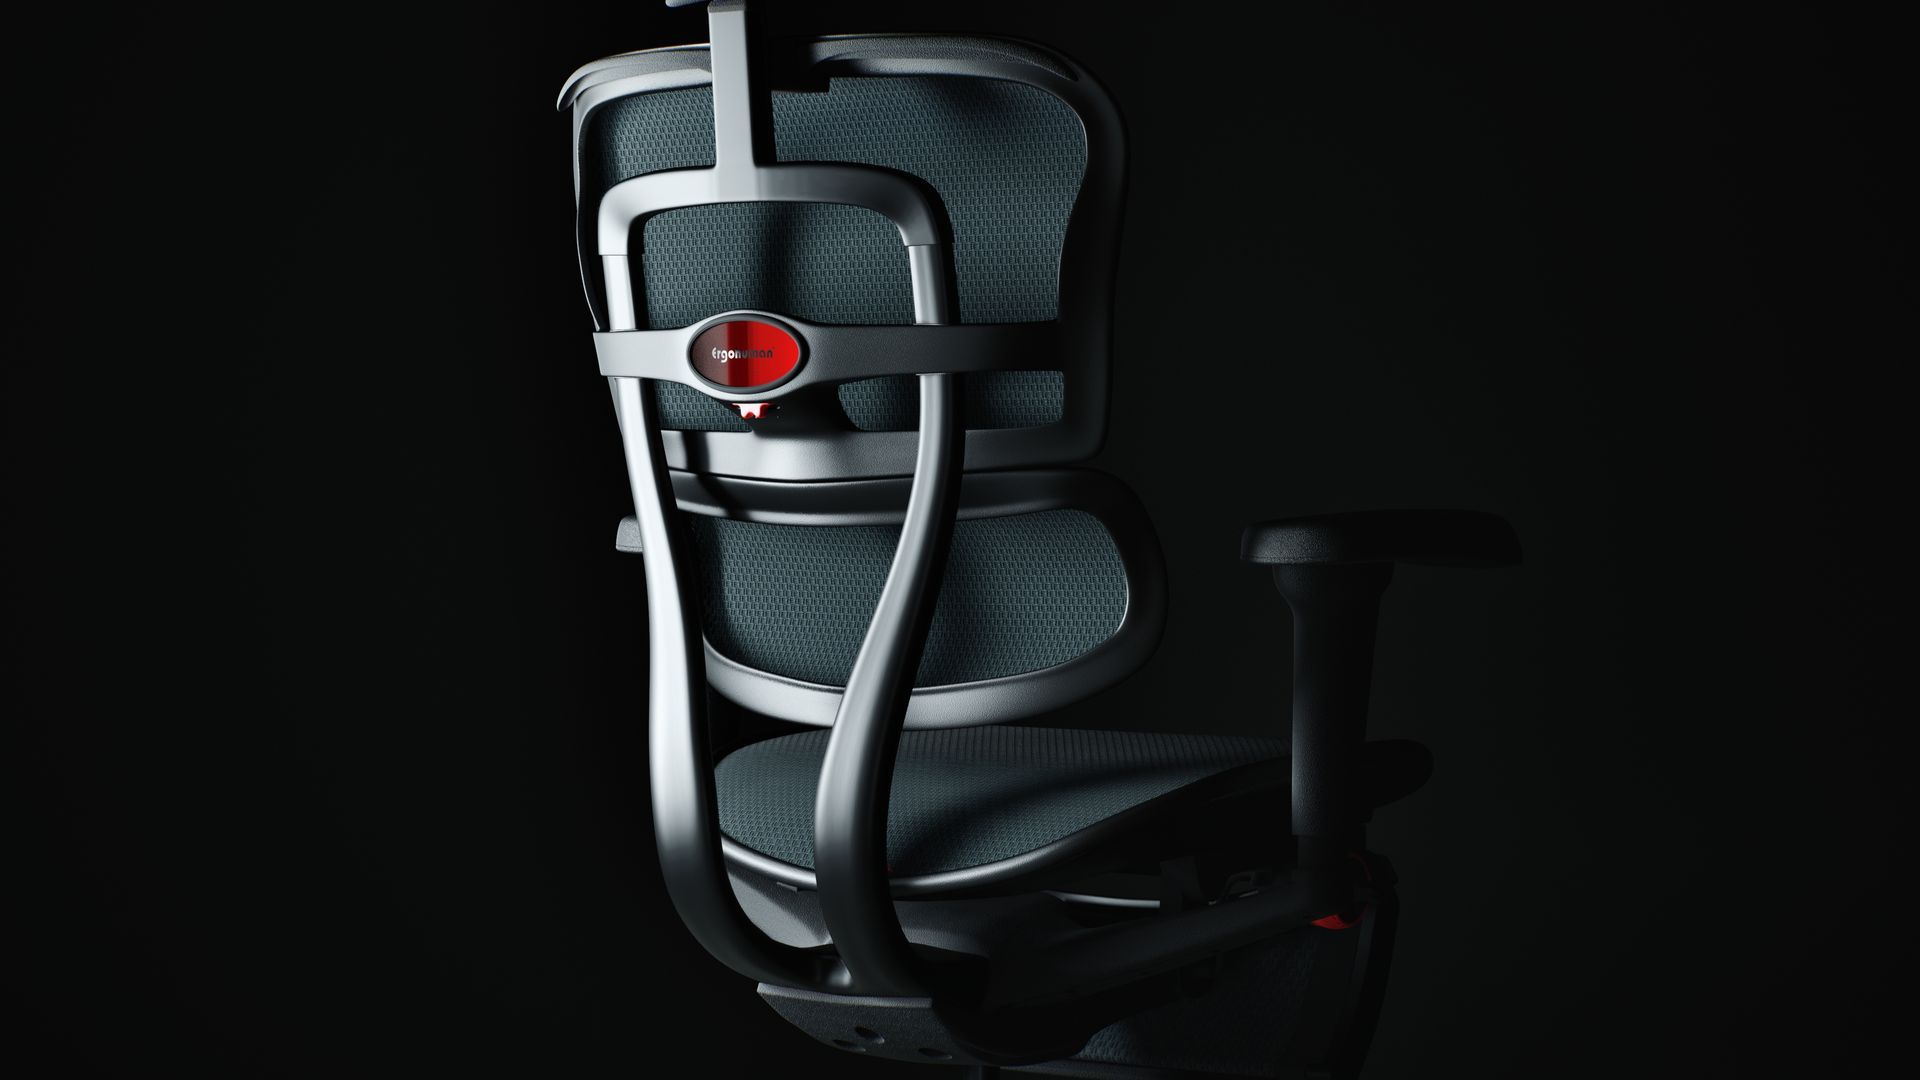 Ergohuman Ultra gaming chair with a black frame, facing back 45-degrees to the right, against a black background